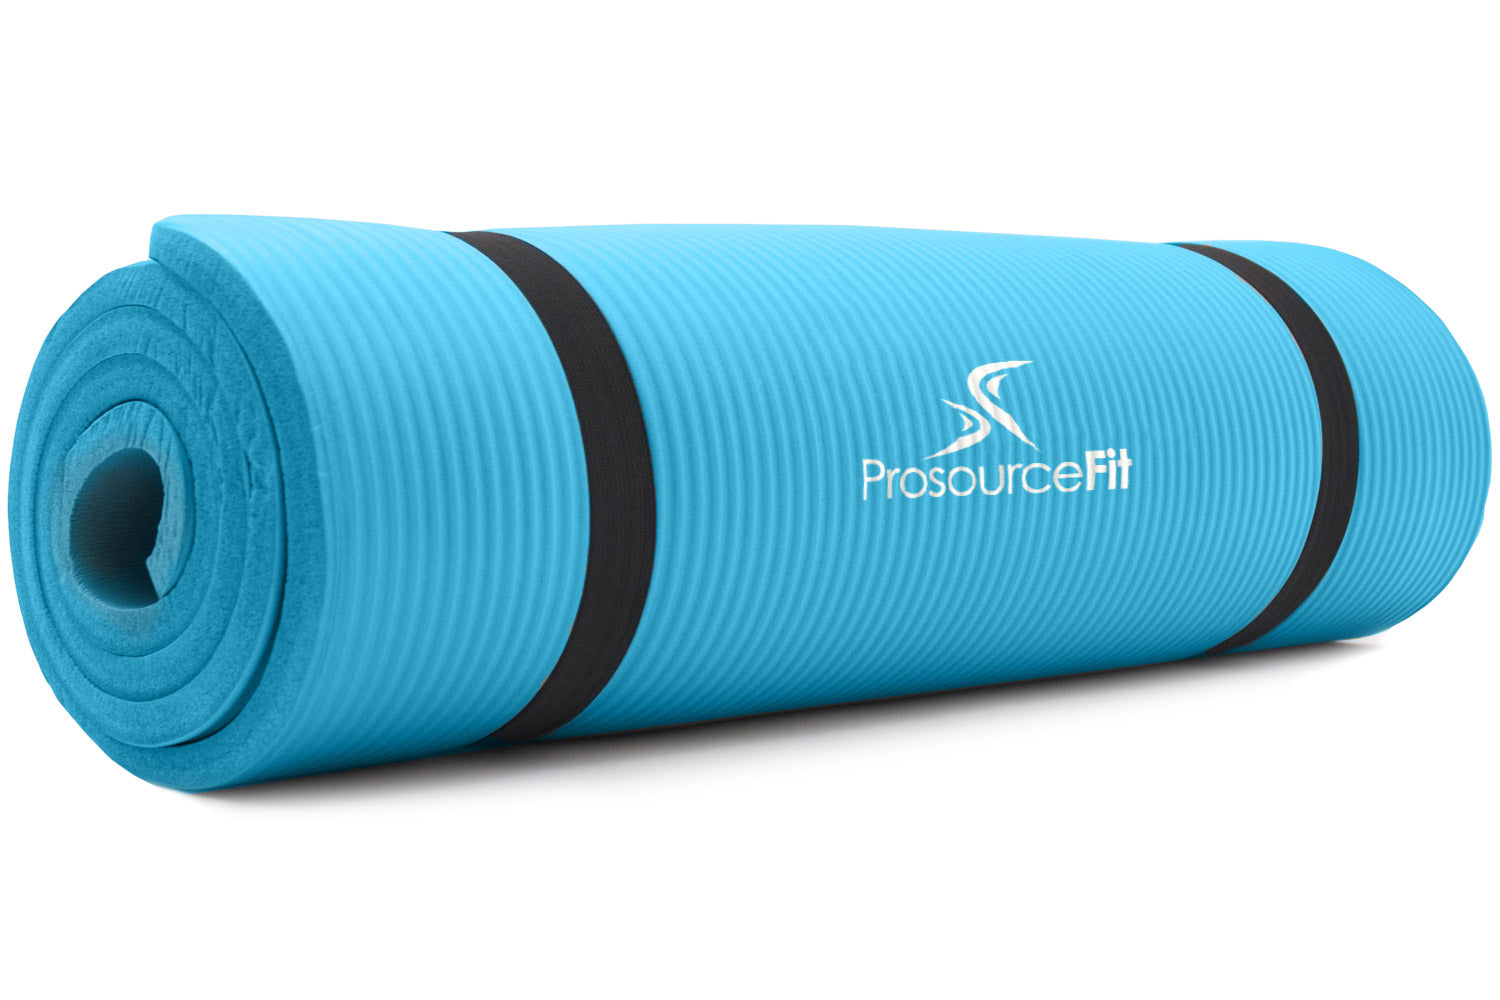 ProsourceFit 1 in Extra Thick Yoga Pilates Exercise Mat, Padded Workout Mat  for Home, Non-Sip Yoga Mat for Men and Women, Blue, 71 in x 24 in, Mats -   Canada